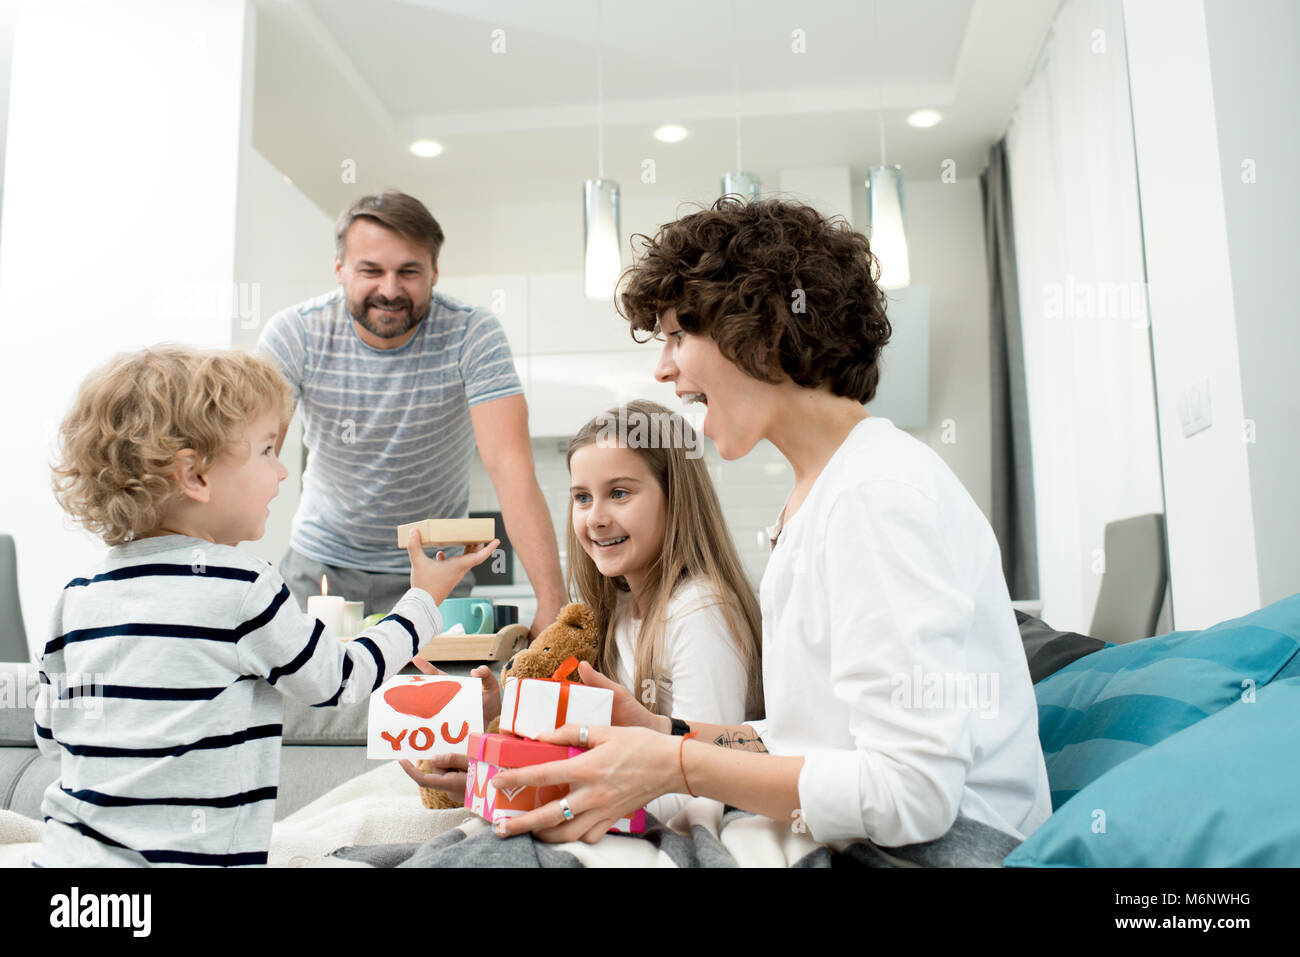 Portrait of happy young family with two children celebrating Valentines day  at home with adorable little boy giving presents in foreground Stock Photo